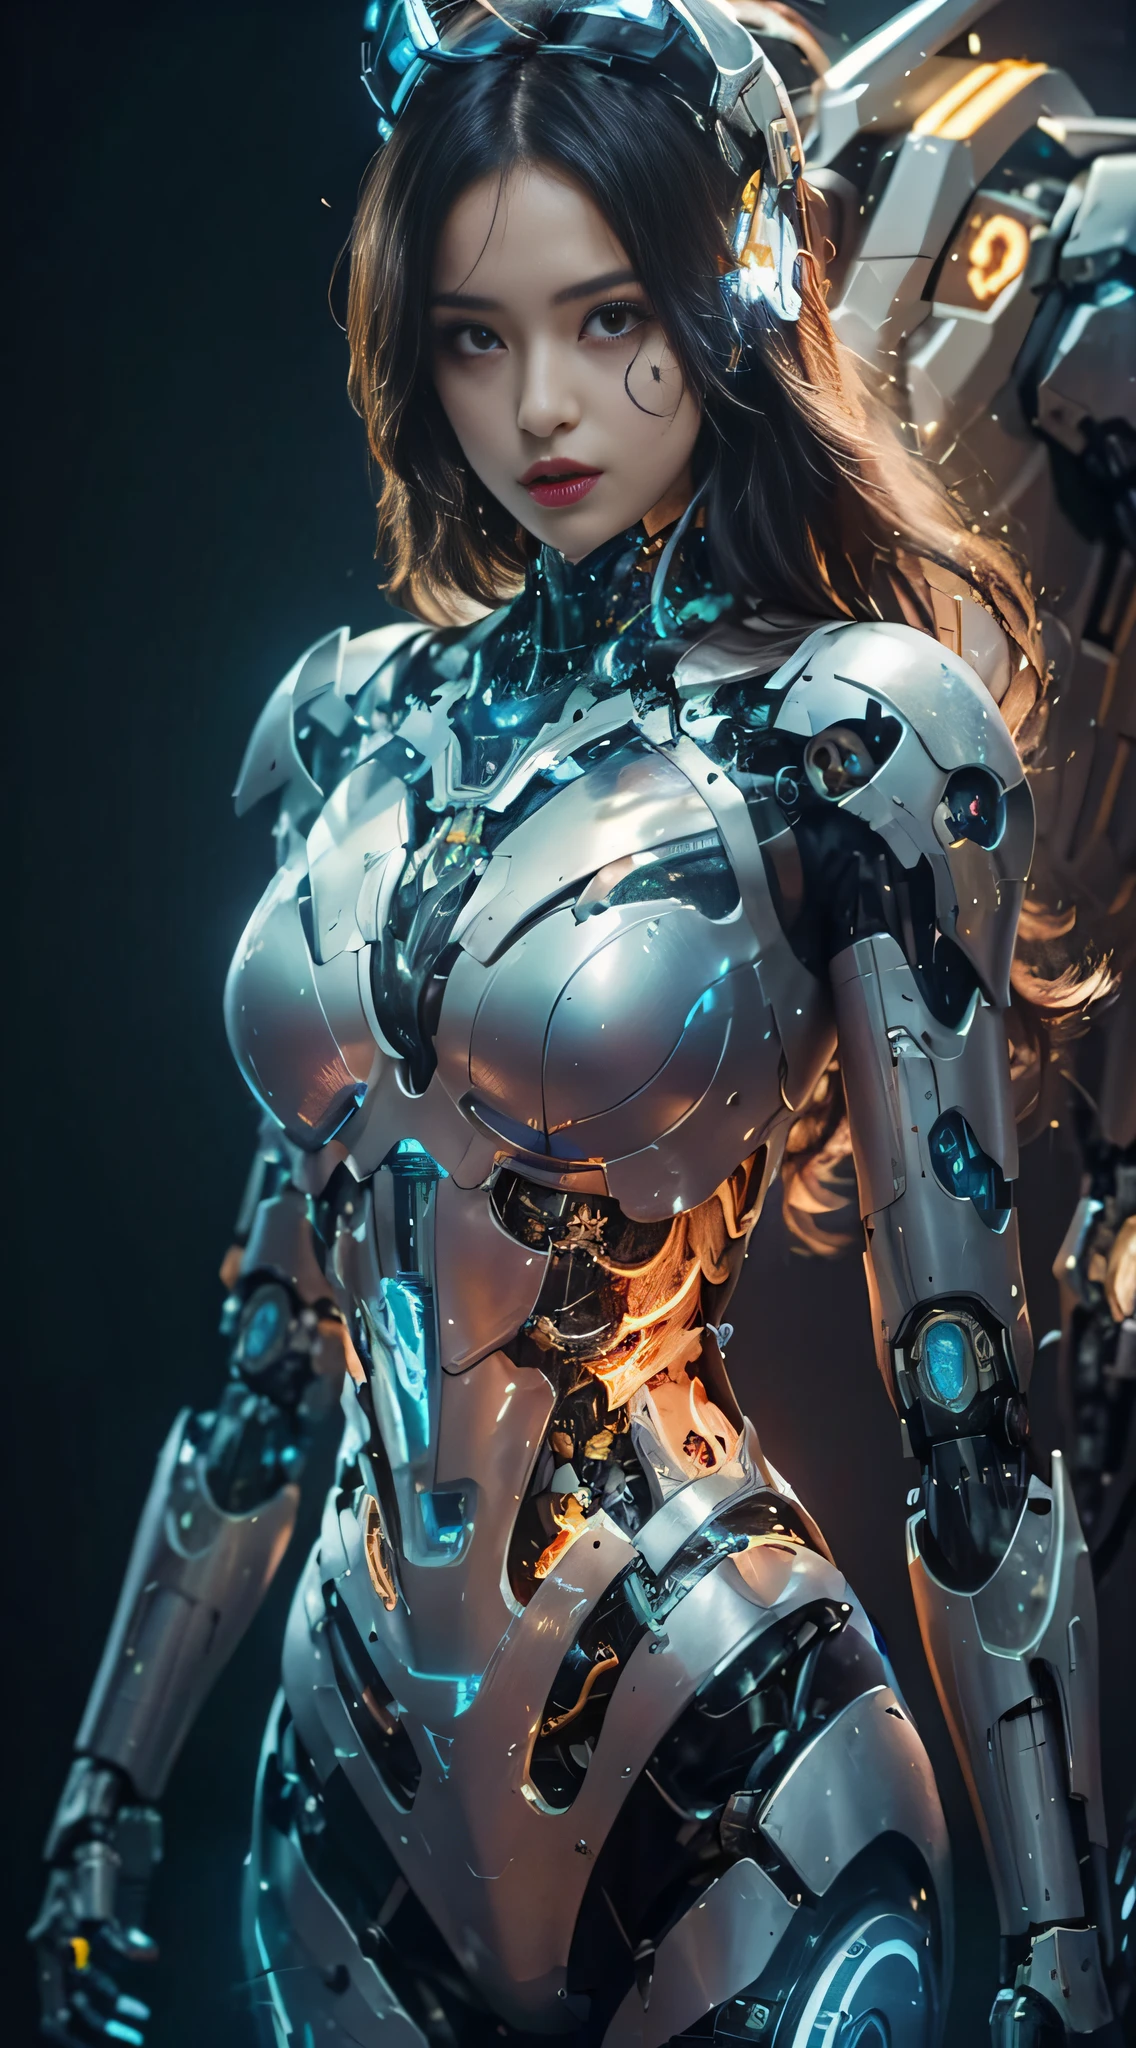 a woman in a futuristic suit with a sword and armor, beutiful girl cyborg, beutiful white girl cyborg, cyborg girl, cyborg - girl, girl in mecha cyber armor, cute cyborg girl, perfect anime cyborg woman, perfect android girl, female cyborg, perfect cyborg female, beautiful cyborg girl, female robot, young lady cyborg, female mecha, armor girl